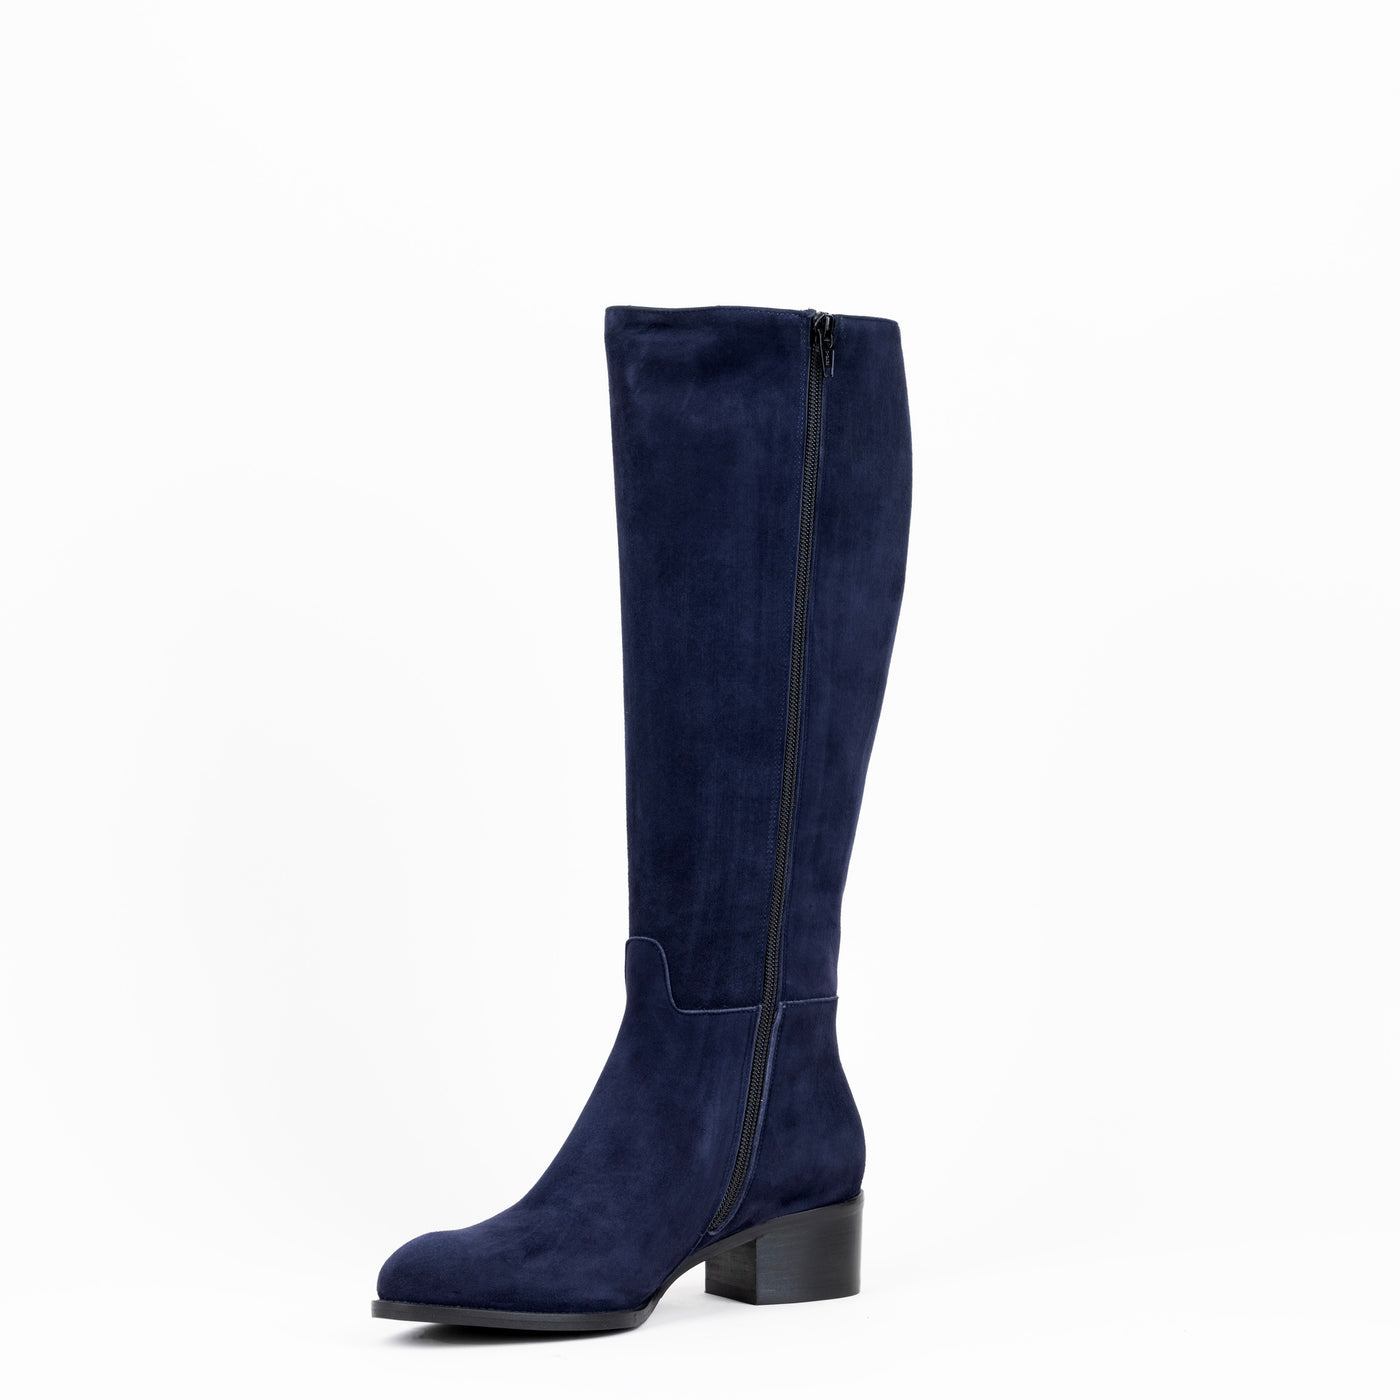 Navy suede leather riding boots